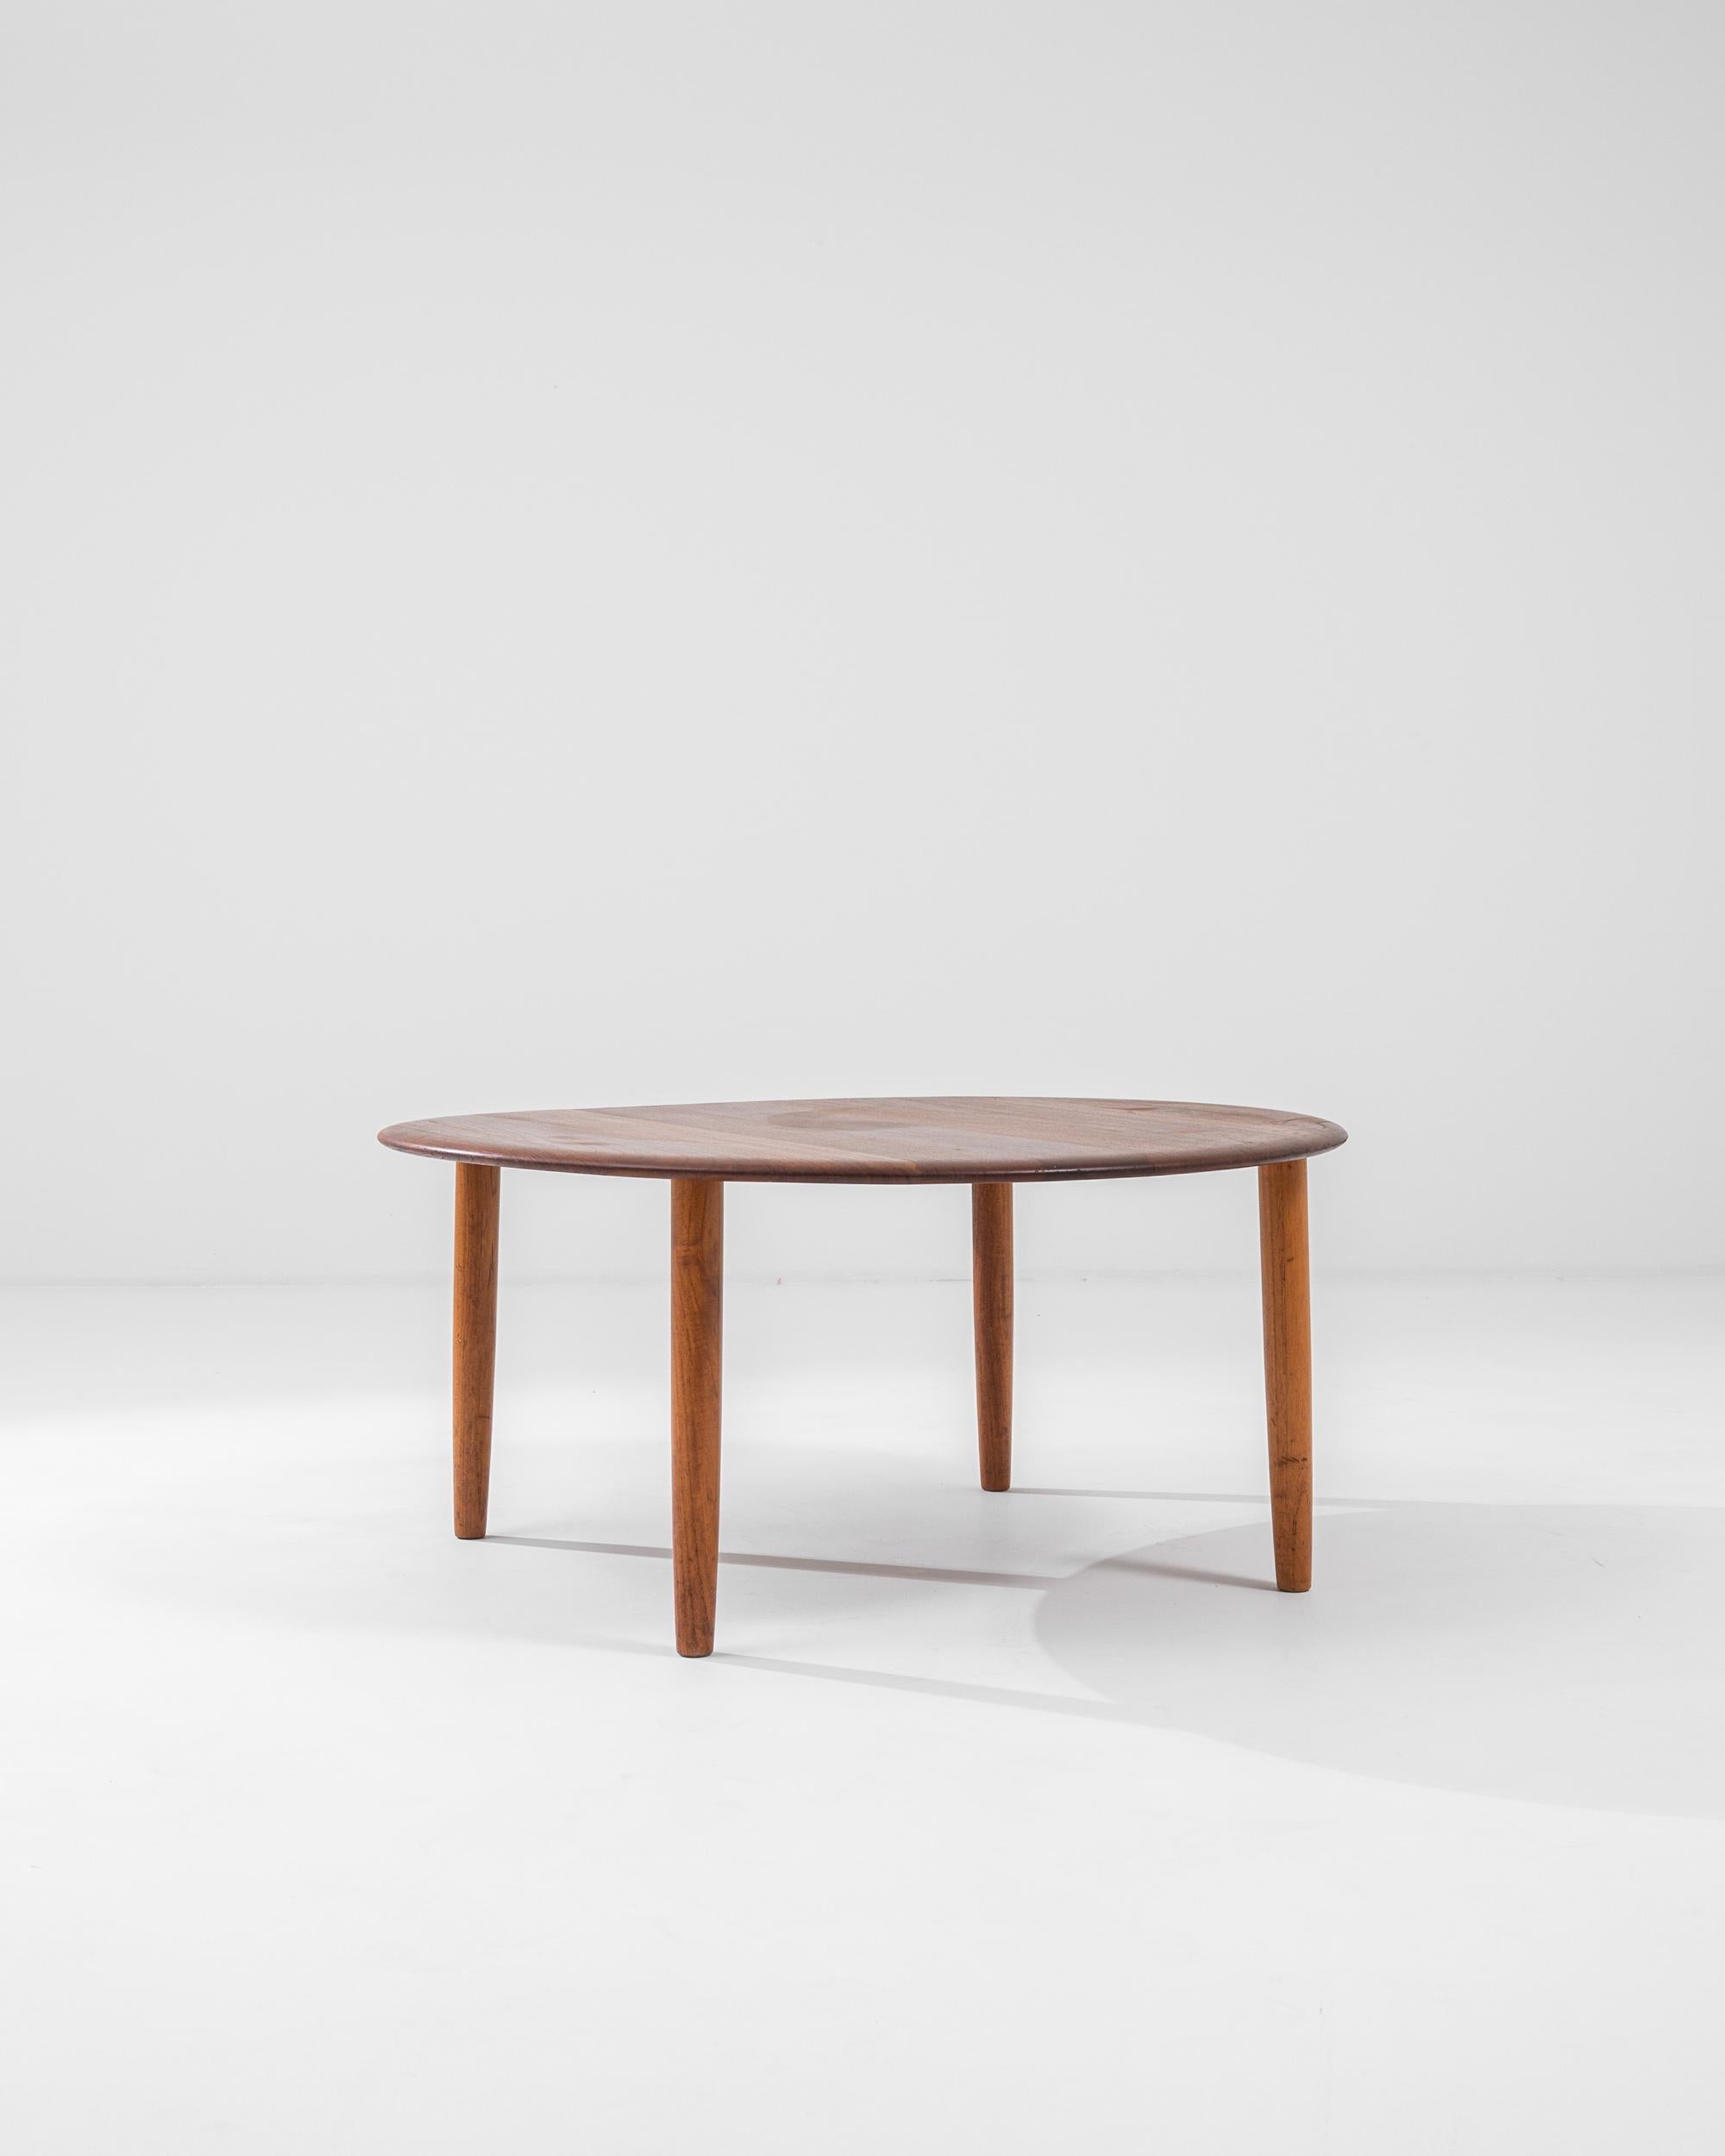 A wooden coffee table from 1960s Denmark. Constructed from solid teak, a staple of mid-century Danish design, this elegantly minimal table radiates a handsome cheer. Gently curved edges and bright wood tones both exude a homely glow and also